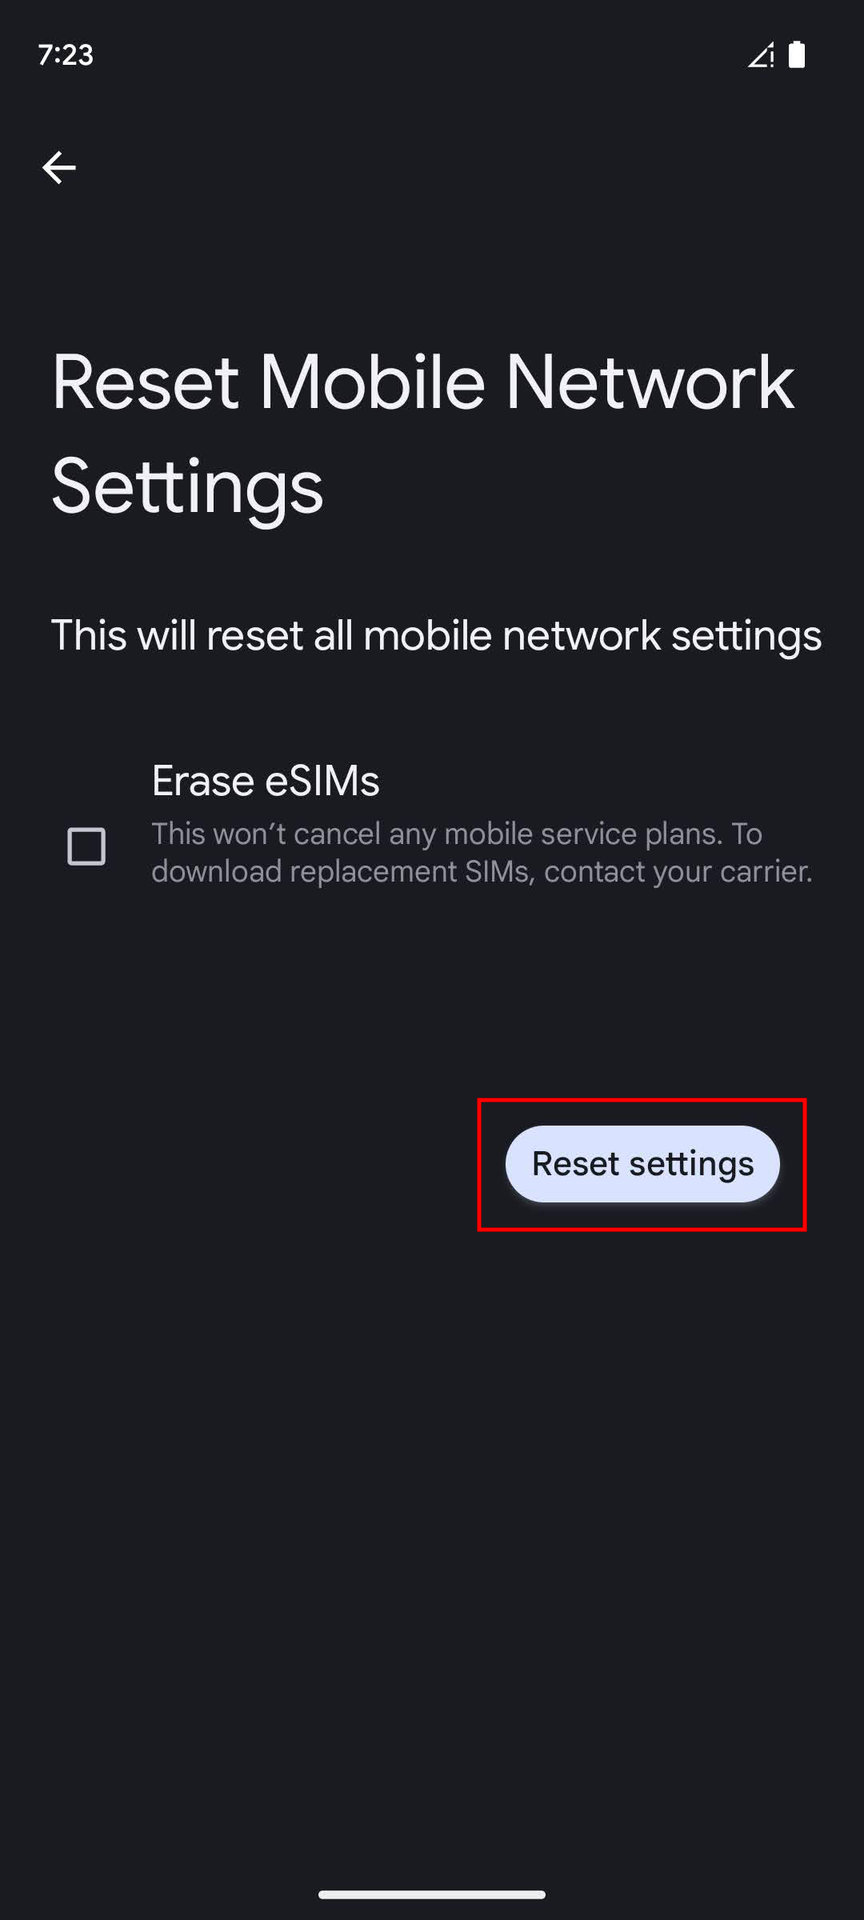 How to reset mobile network settings on Android (4)